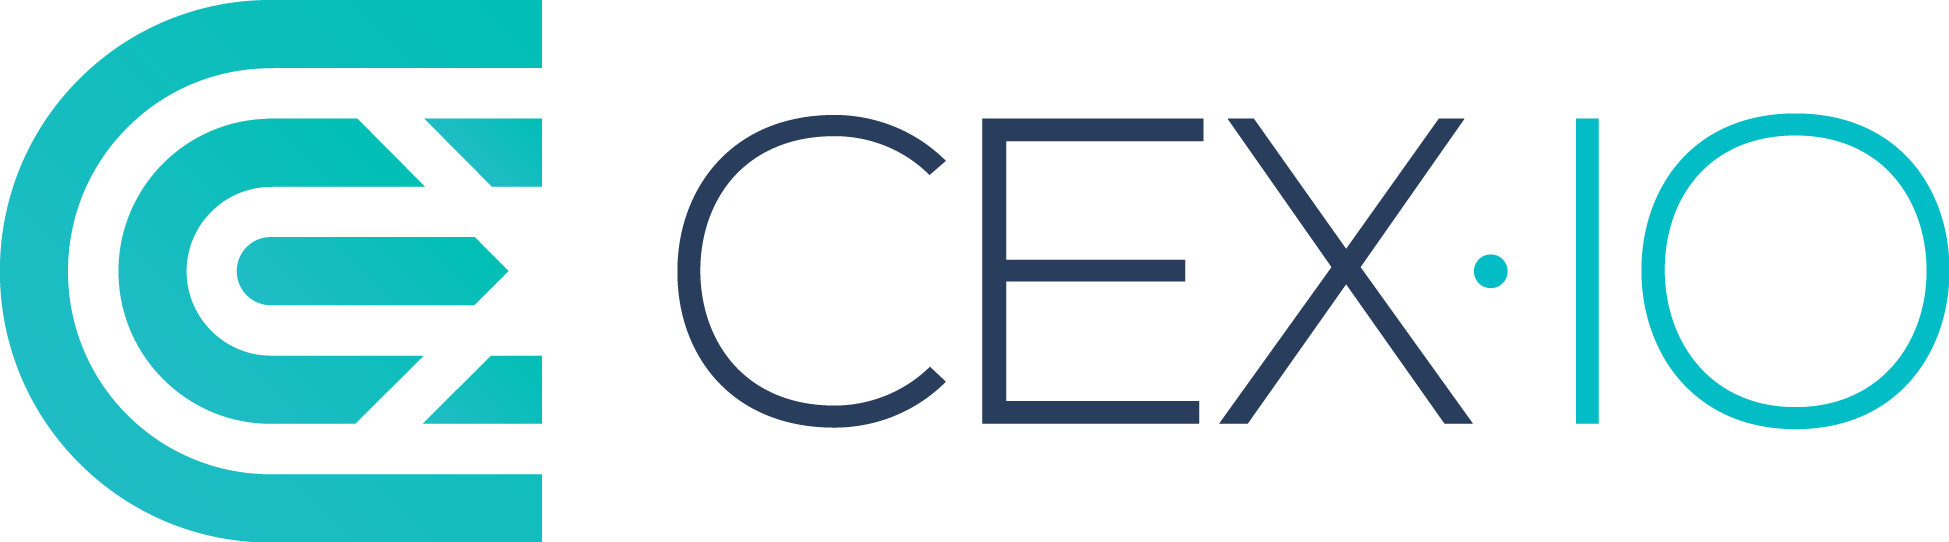 cex-logo.png